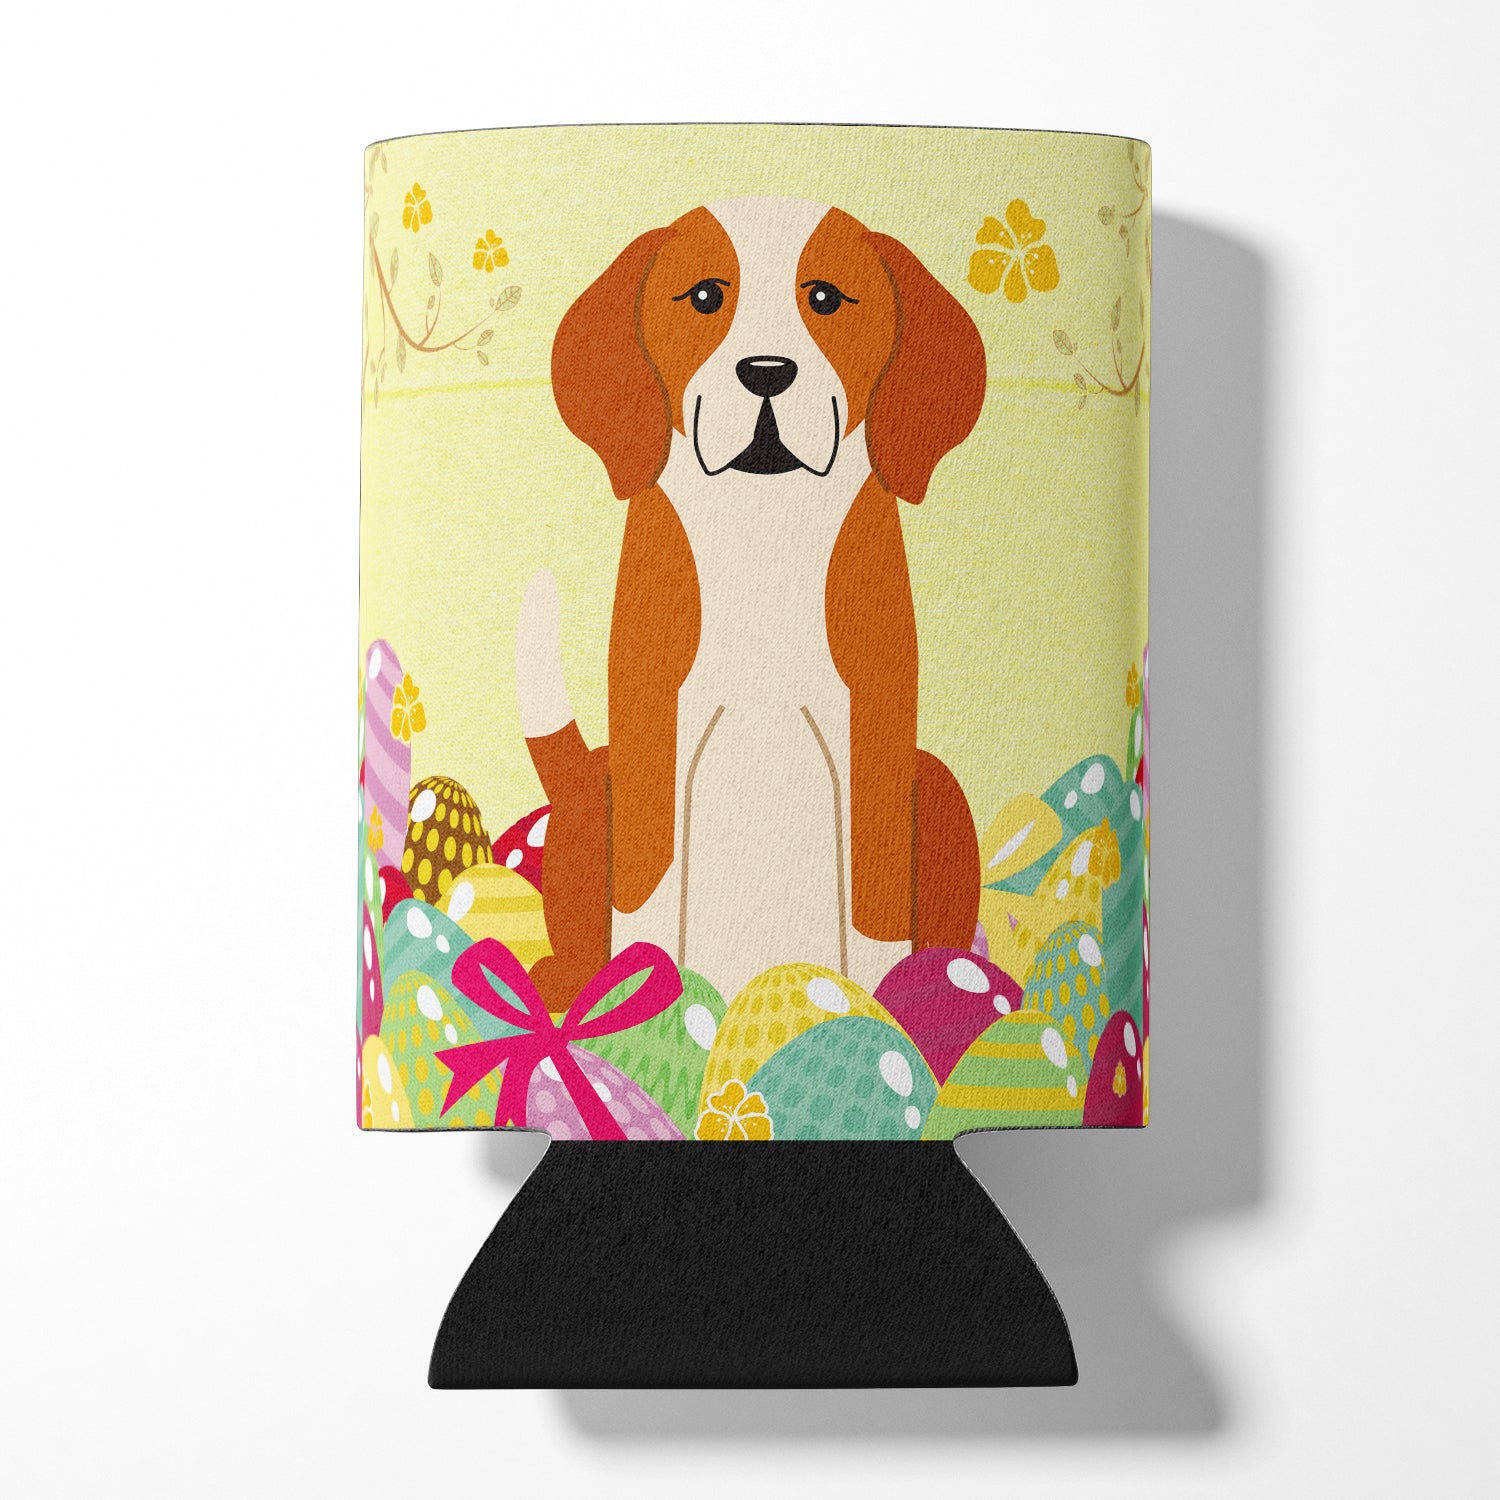 Easter Eggs English Foxhound Can or Bottle Hugger BB6110CC  the-store.com.